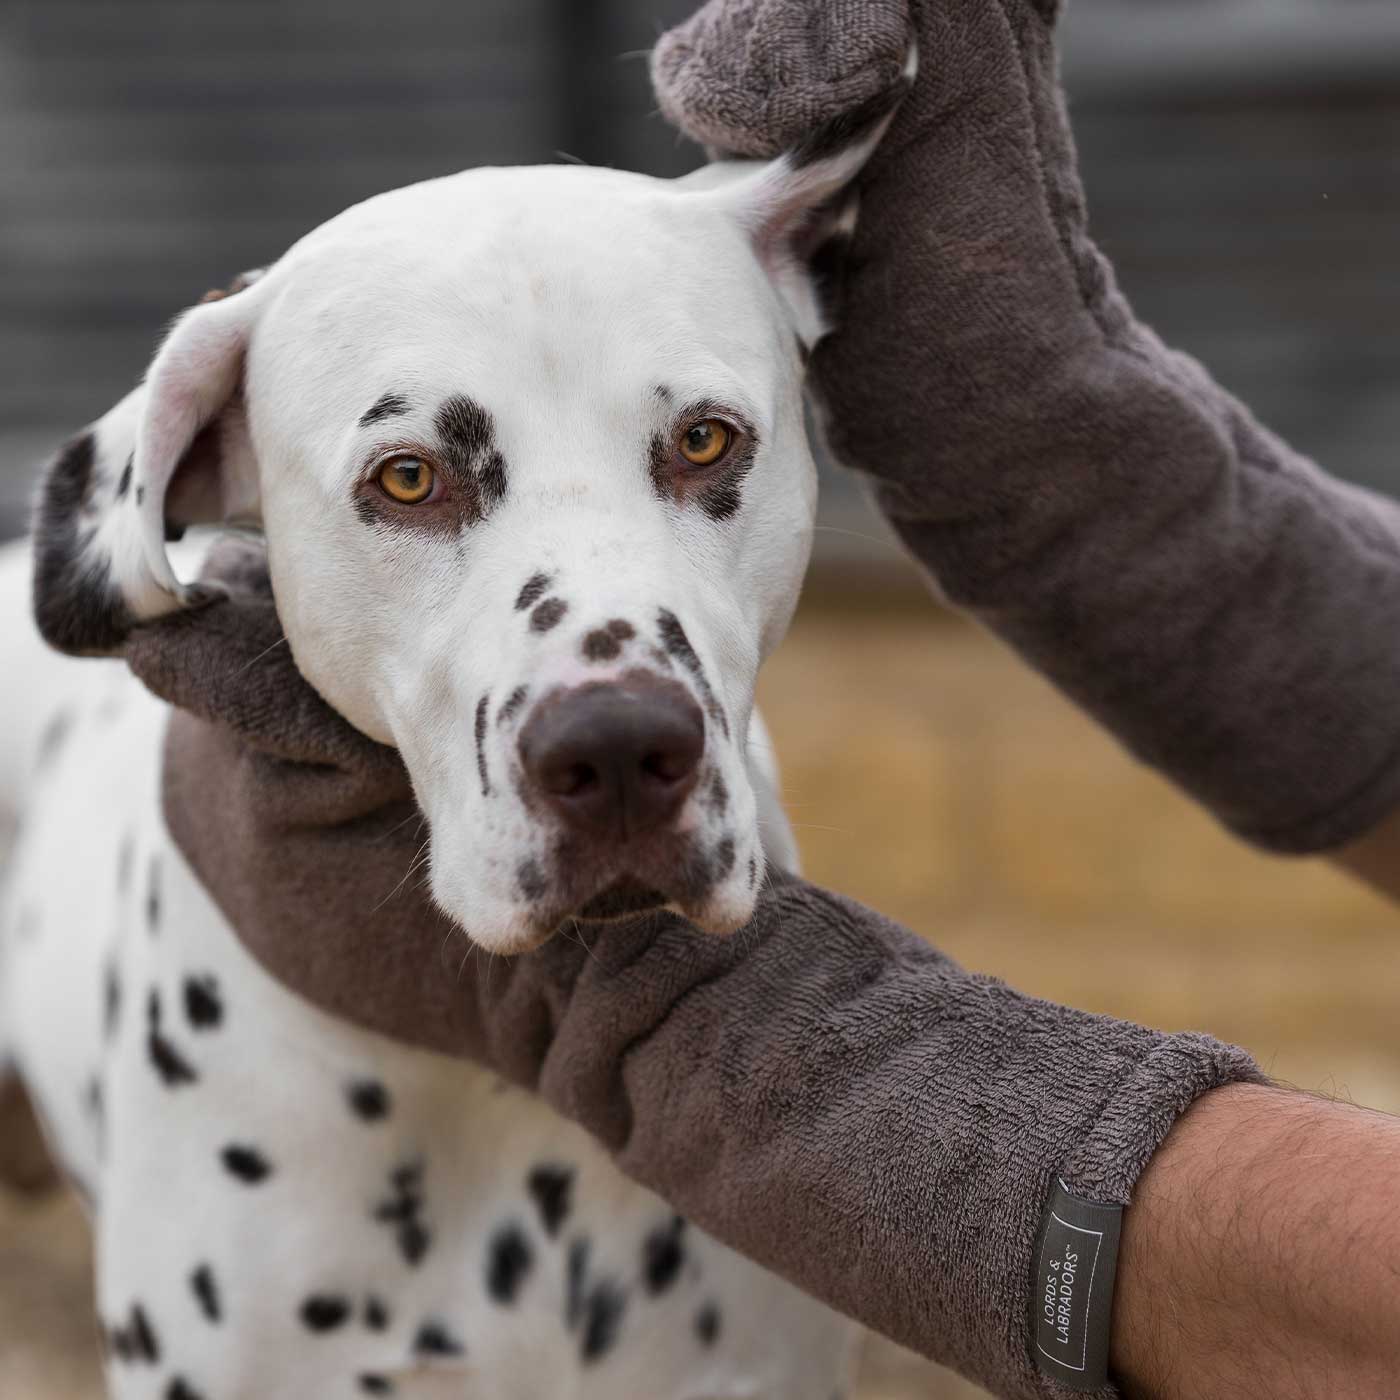 Introducing the ultimate bamboo dog drying mitts in beautiful Mole (Brown), made from luxurious bamboo to aid sensitive skin featuring universal size to fit all with super absorbent material for easy pet drying! The perfect dog drying gloves, available now at Lords & Labradors US, In four colors!